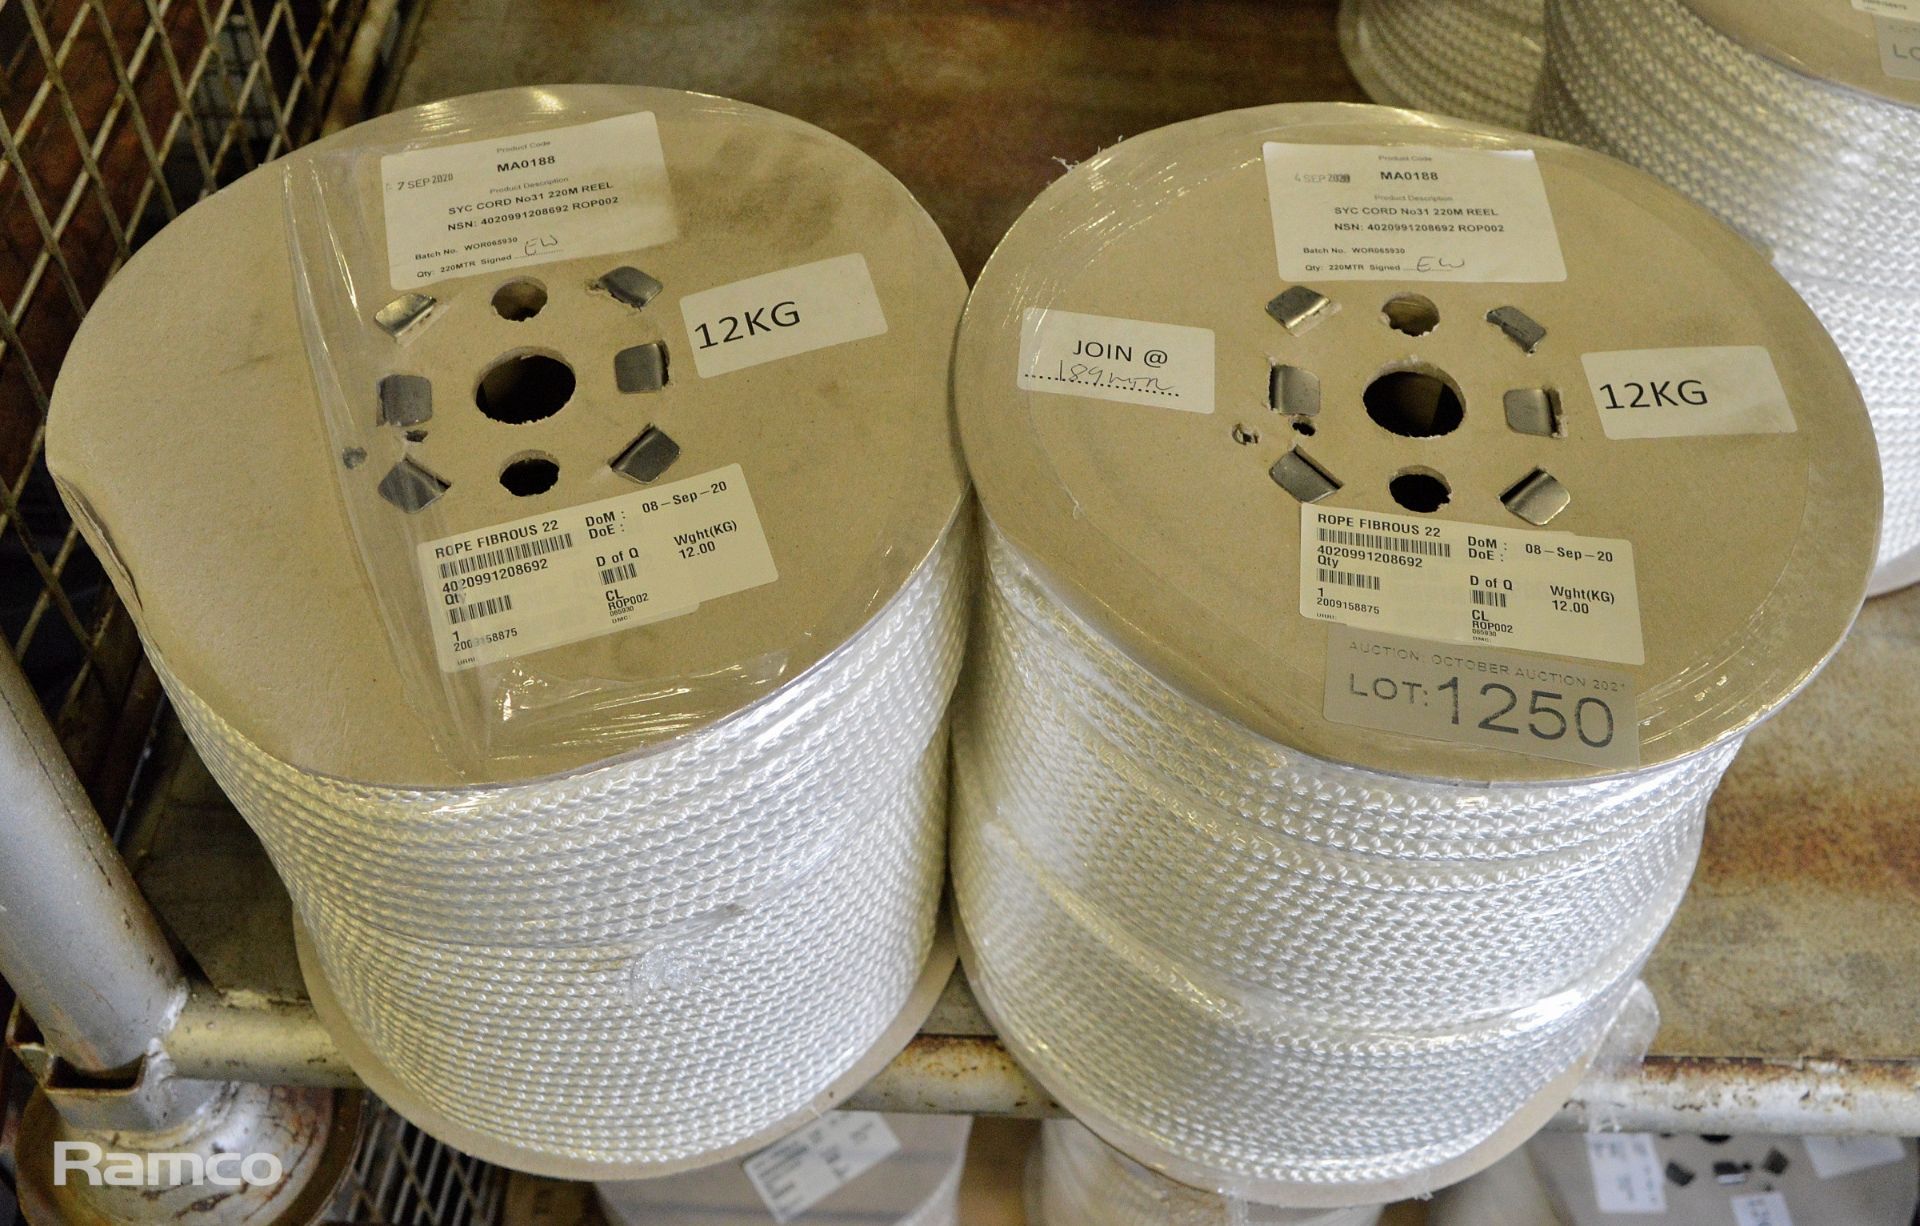 2x White Poly Fibrous Rope Coils - 220m x 9mm - SYC cord No31 - NSN 4020-99-120-8692 - 14k - Image 2 of 2